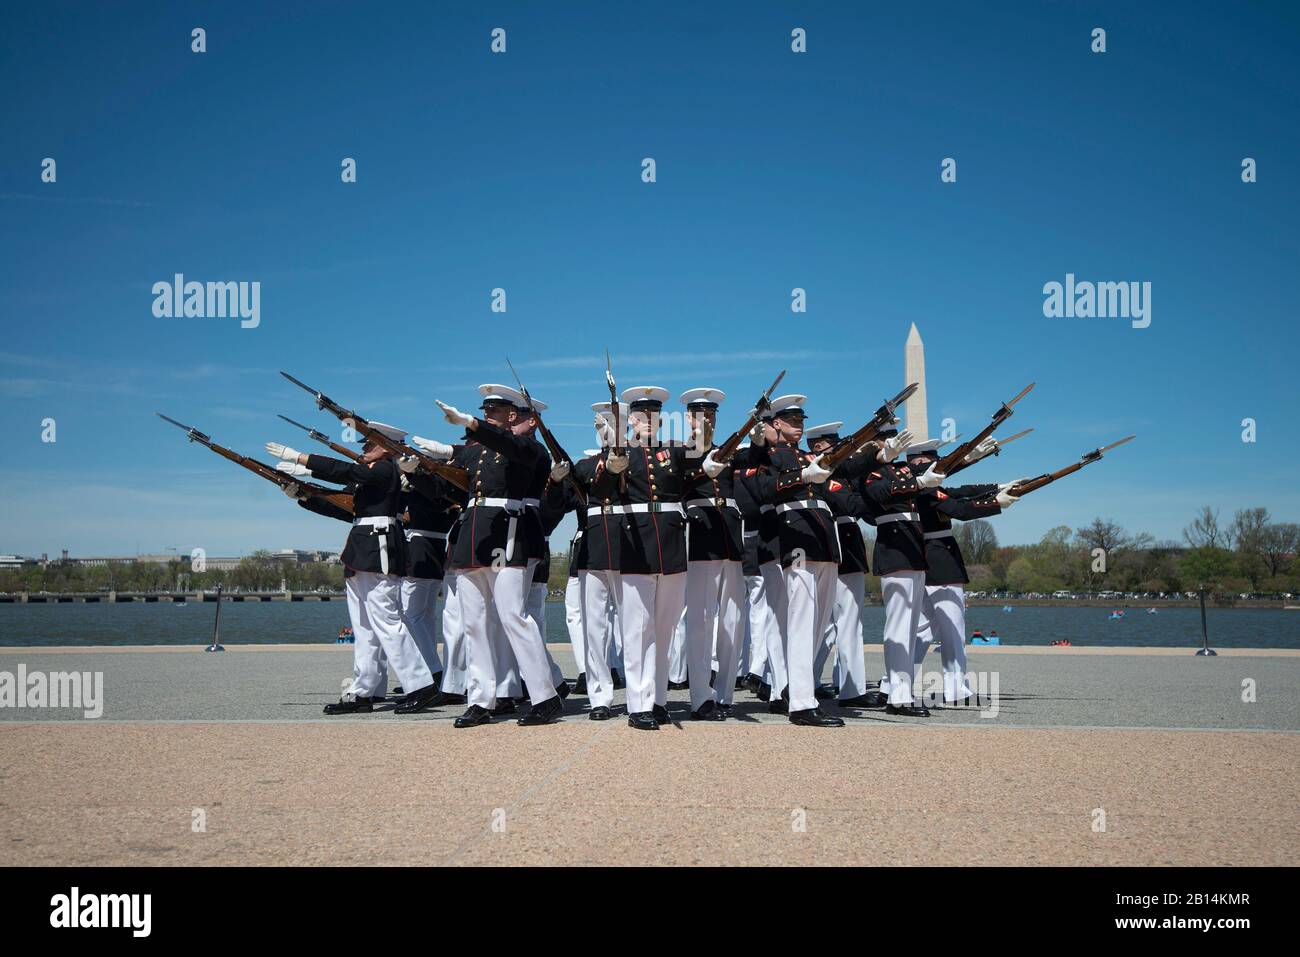 The U.S. Marine Corps Silent Drill Platoon competes during the Joint Service Drill Team Exhibition at the Jefferson Memorial in Washington, D.C, April 8, 2017. Drill teams from all four branches of the U.S. armed forces and the U.S. Coast Guard competed in a display of skills at the event that celebrated U.S. military heritage at the National Cherry Blossom Festival. (U.S. Air National Guard Photo by Staff Sgt. Christopher S. Muncy) Stock Photo